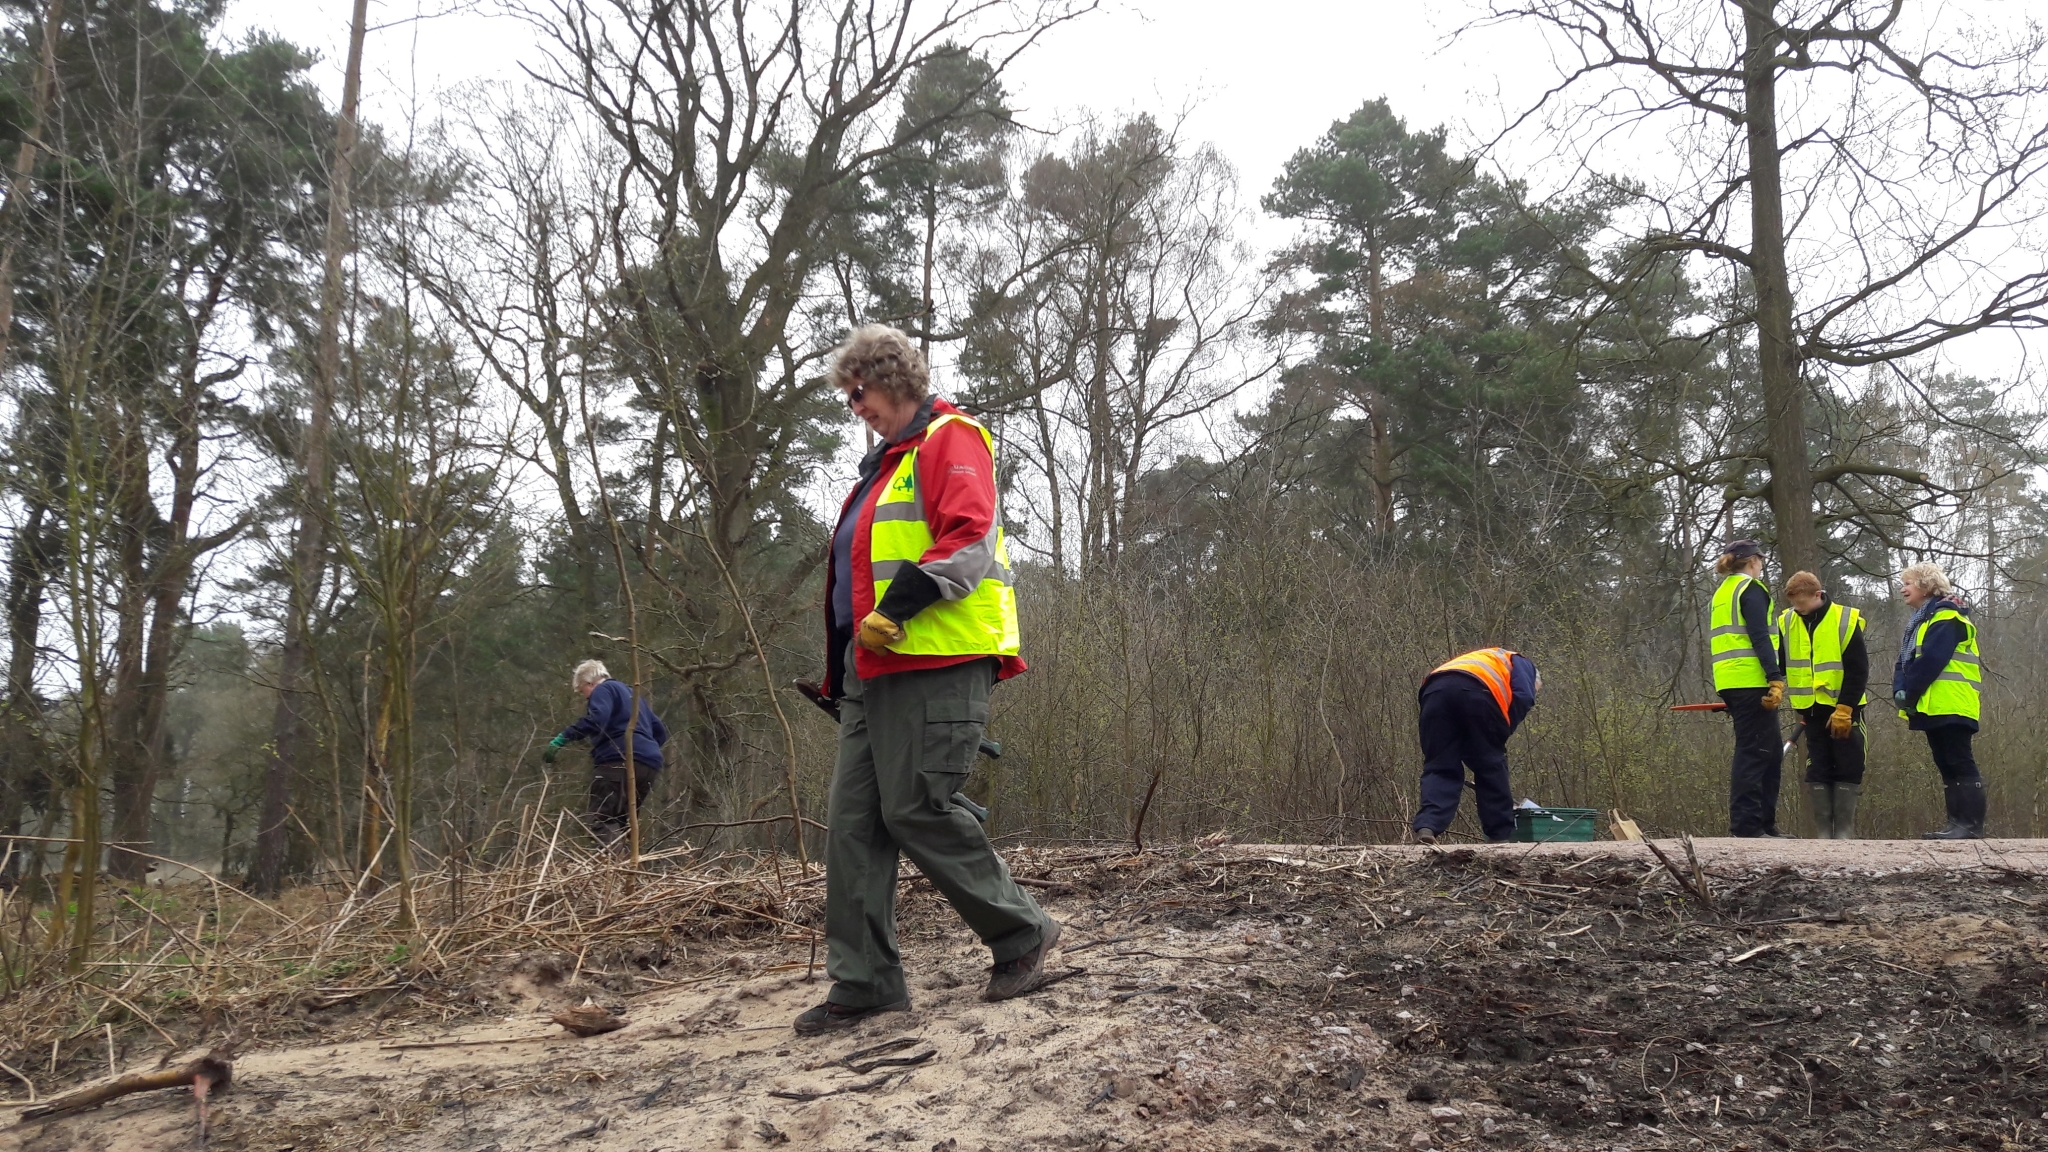 A photo from the FoTF Conservation Event - April 2018 - Improving habitat at High Lodge : A volunteer walks down a slope, with other volunteers working in background